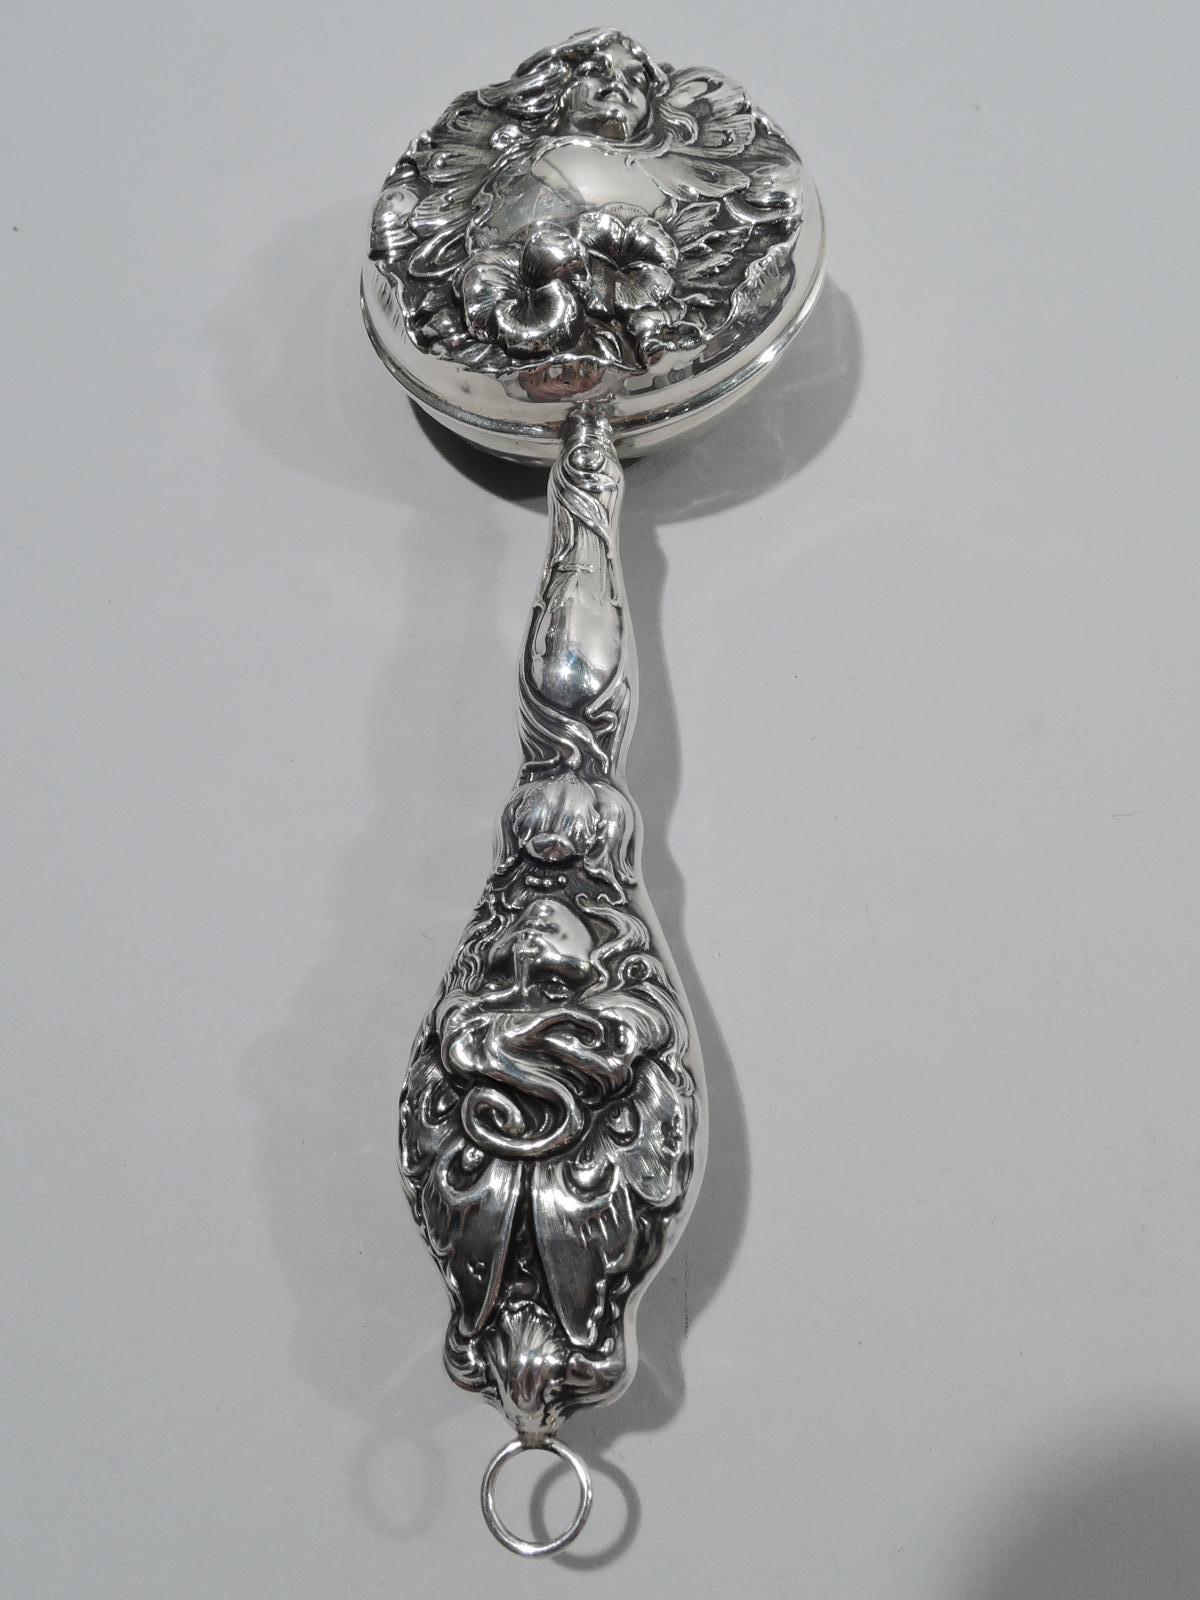 Turn-of-the-century American Art Nouveau sterling silver rattle. Round head and baluster handle with embossed ornament: Female heads with fairy wings and tresses flowing into scrolls and flowers. Scrolled cartouches (vacant). Marked “Sterling” and